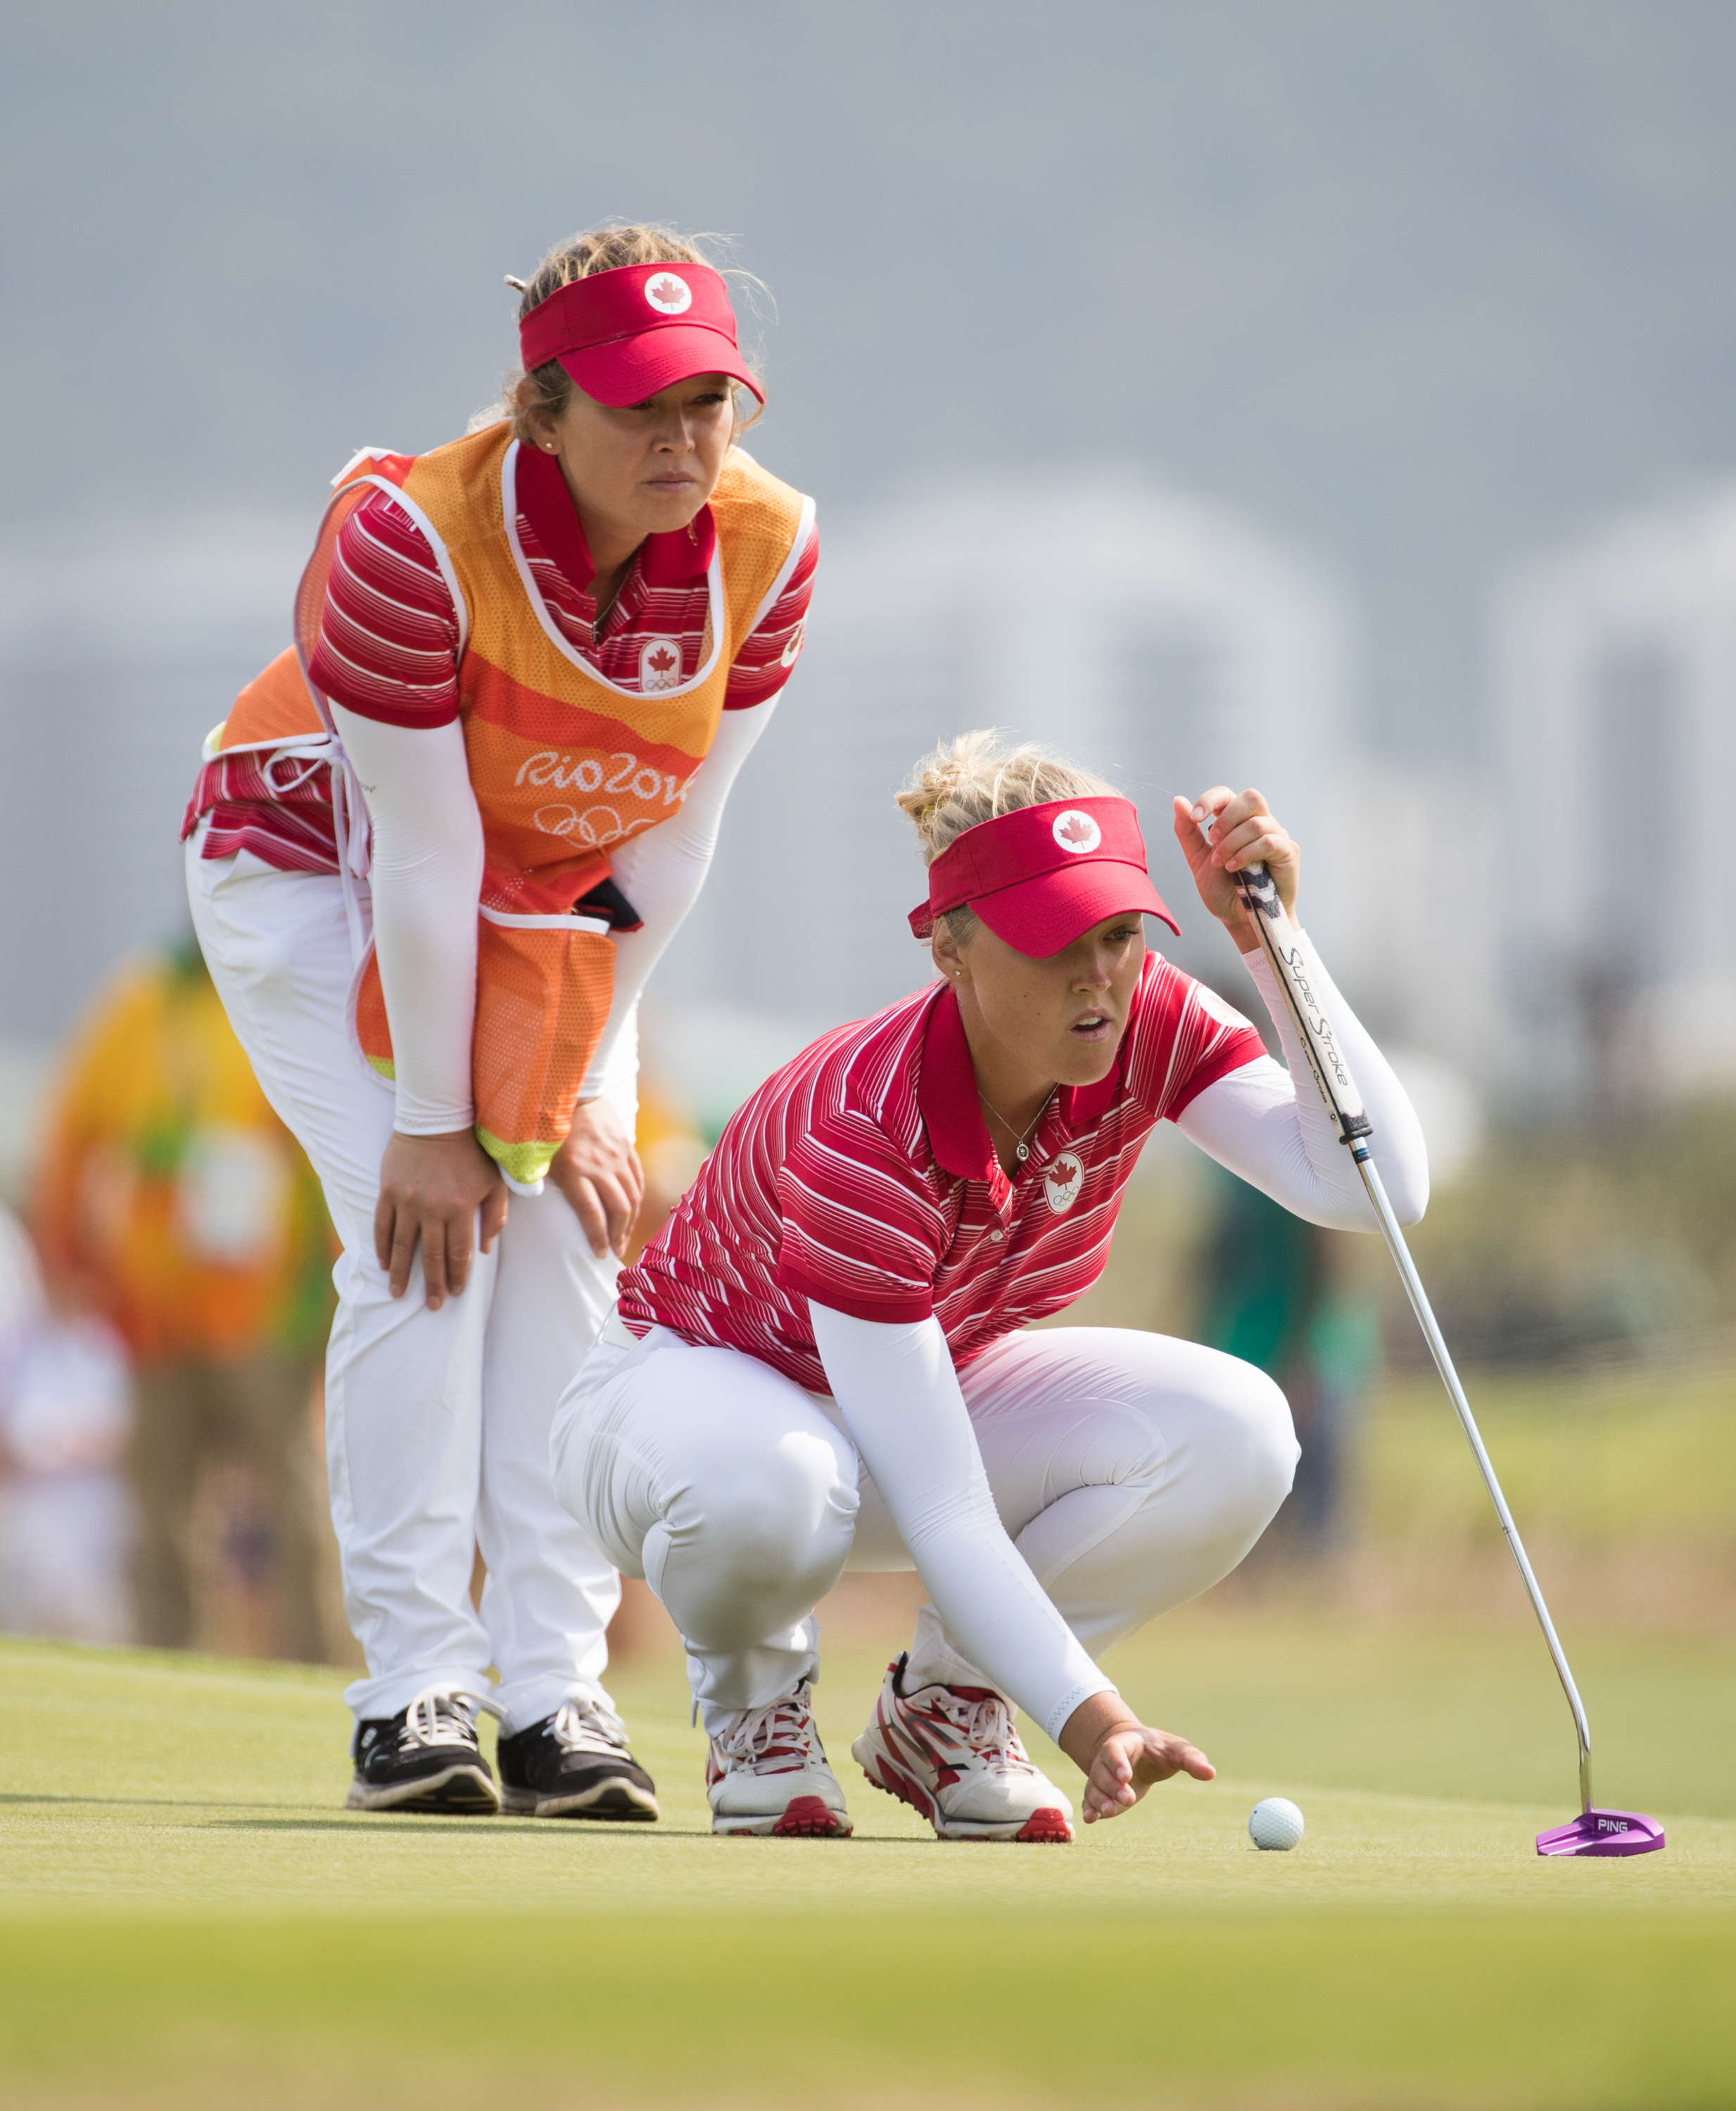 Brooke Henderson competes at Rio 2016